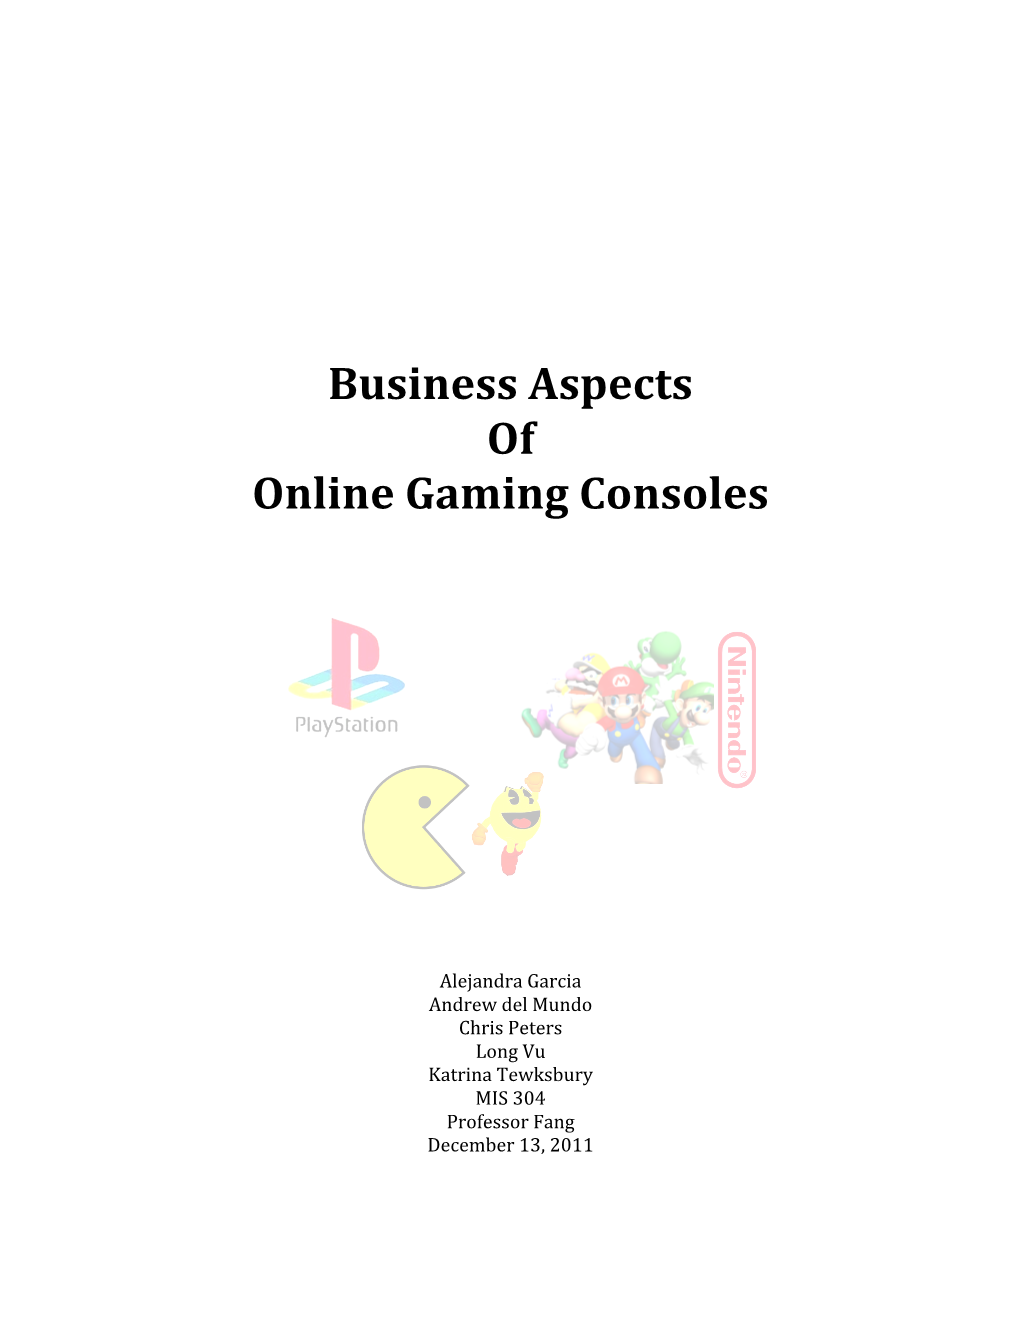 Business Aspects of Online Gaming Consoles